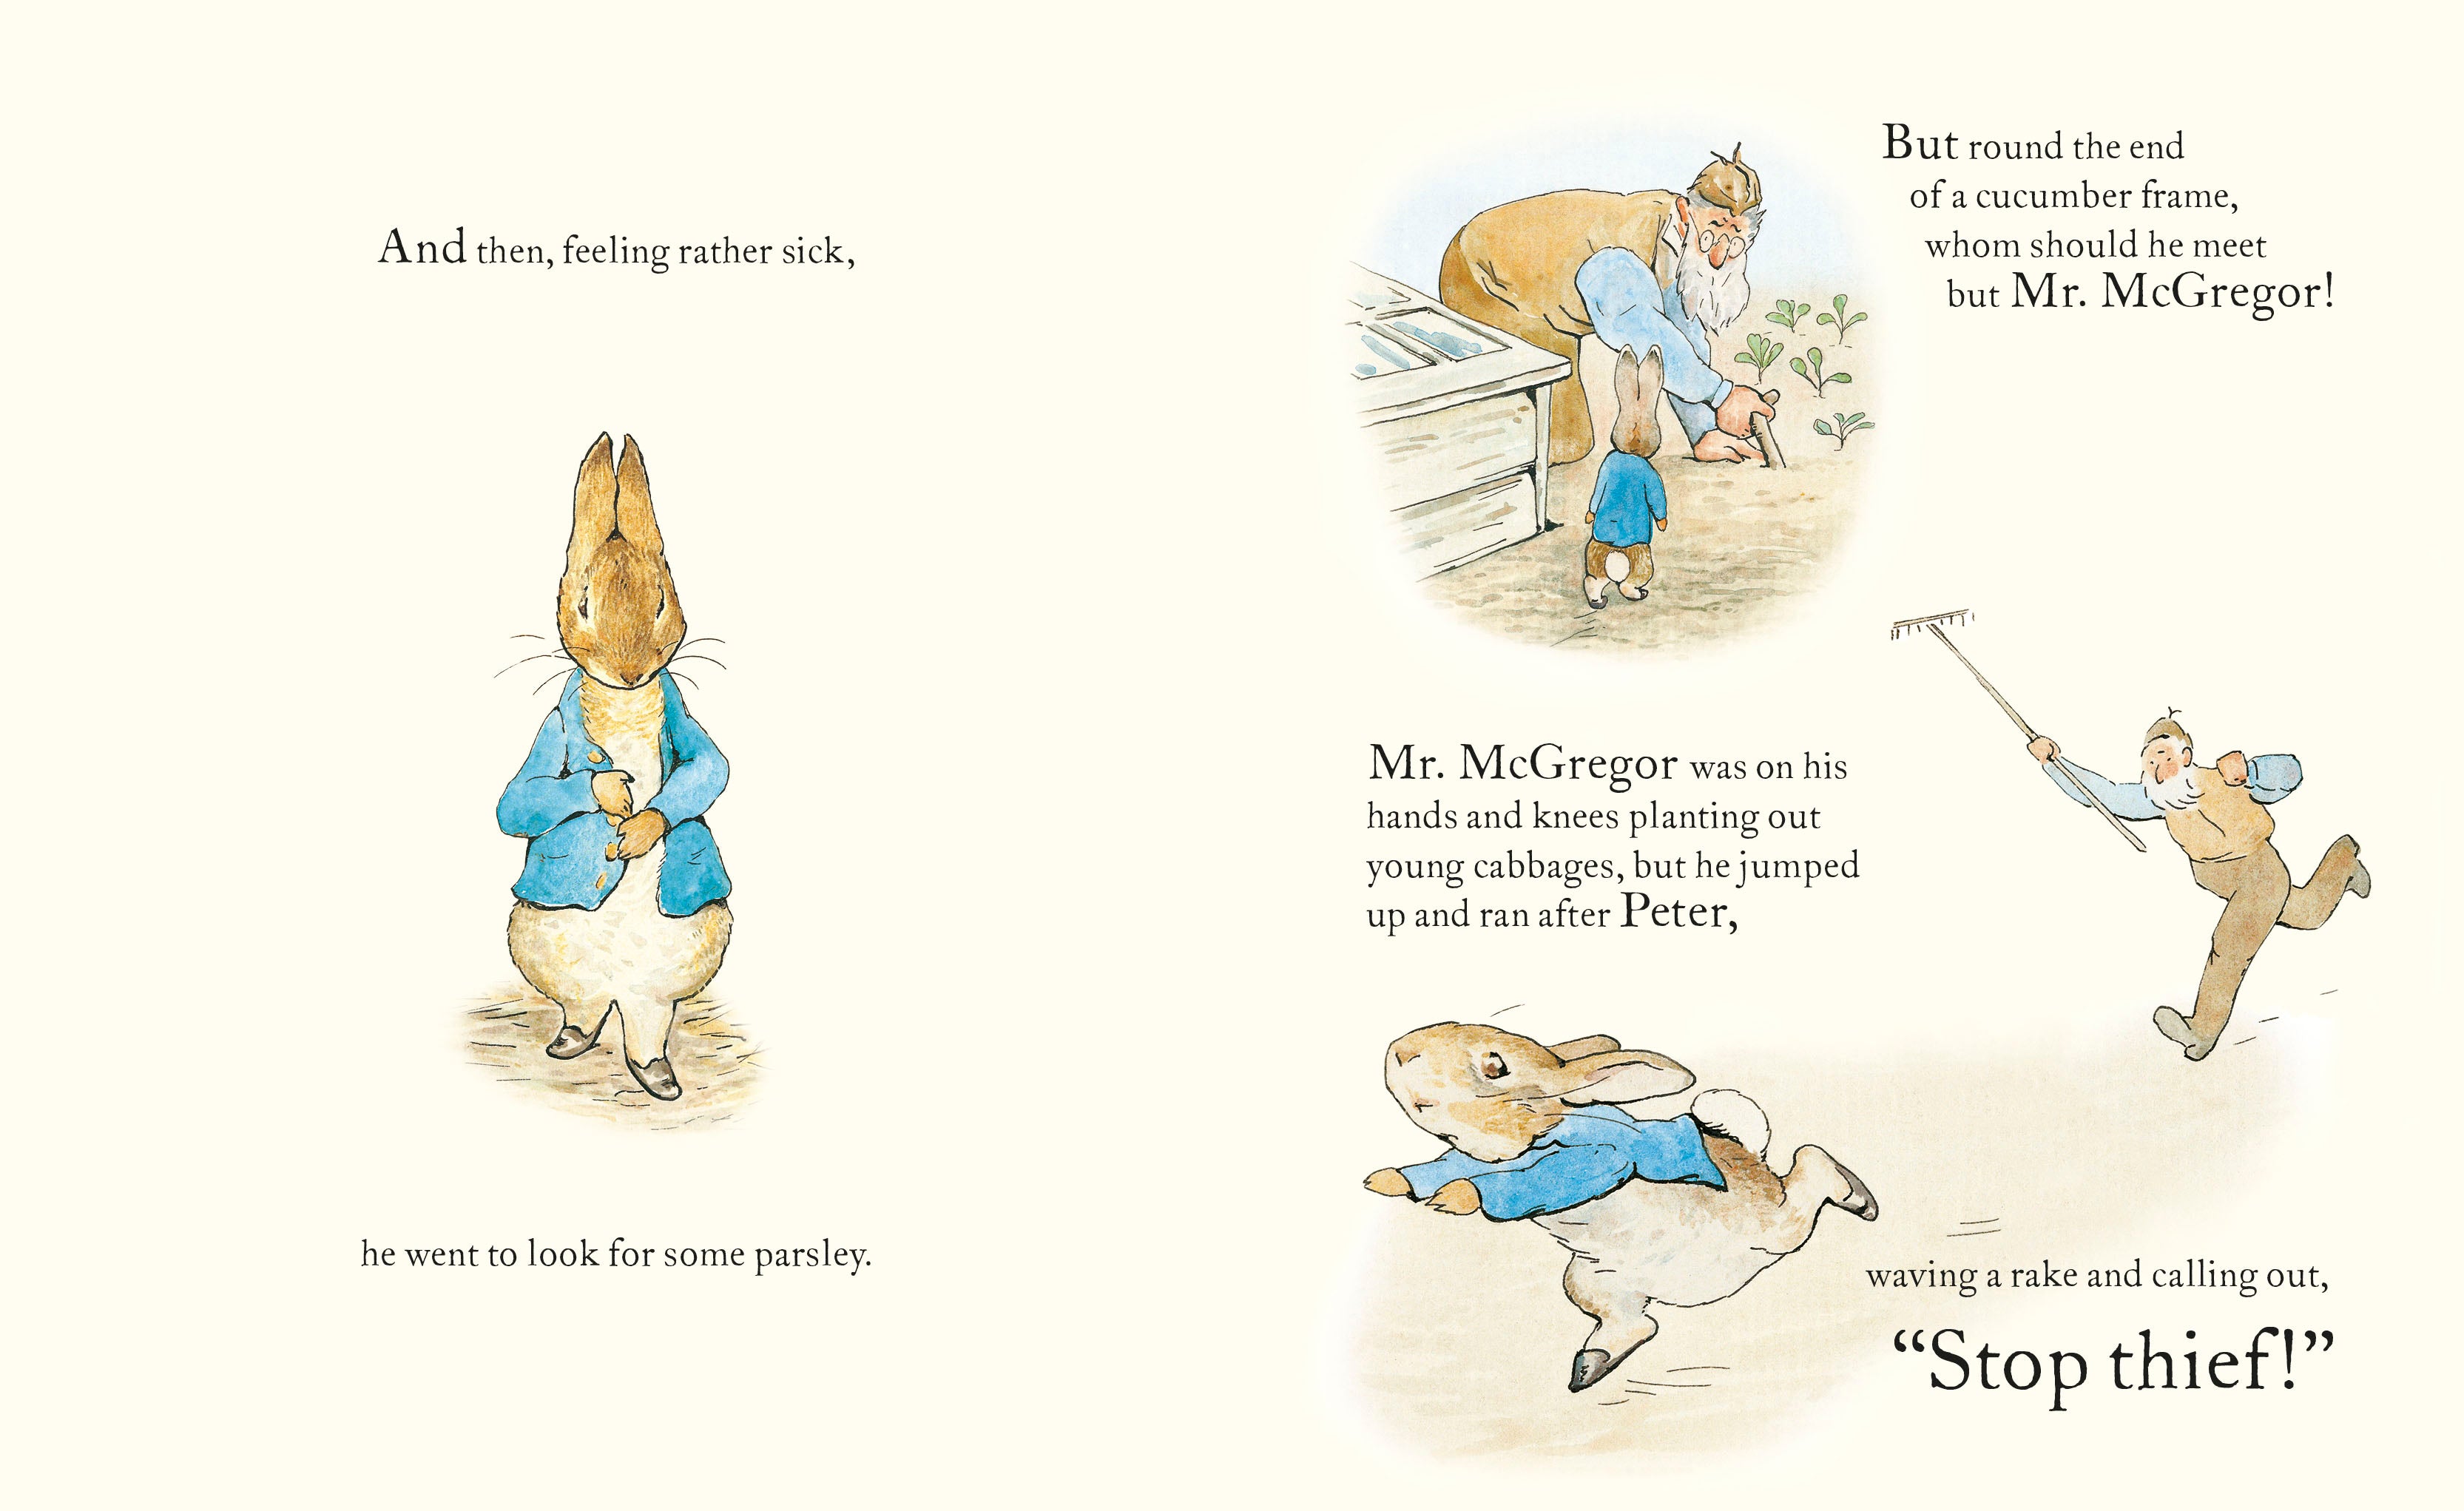 The Tale of Peter Rabbit Picture Book | Kids Book - Lifestory